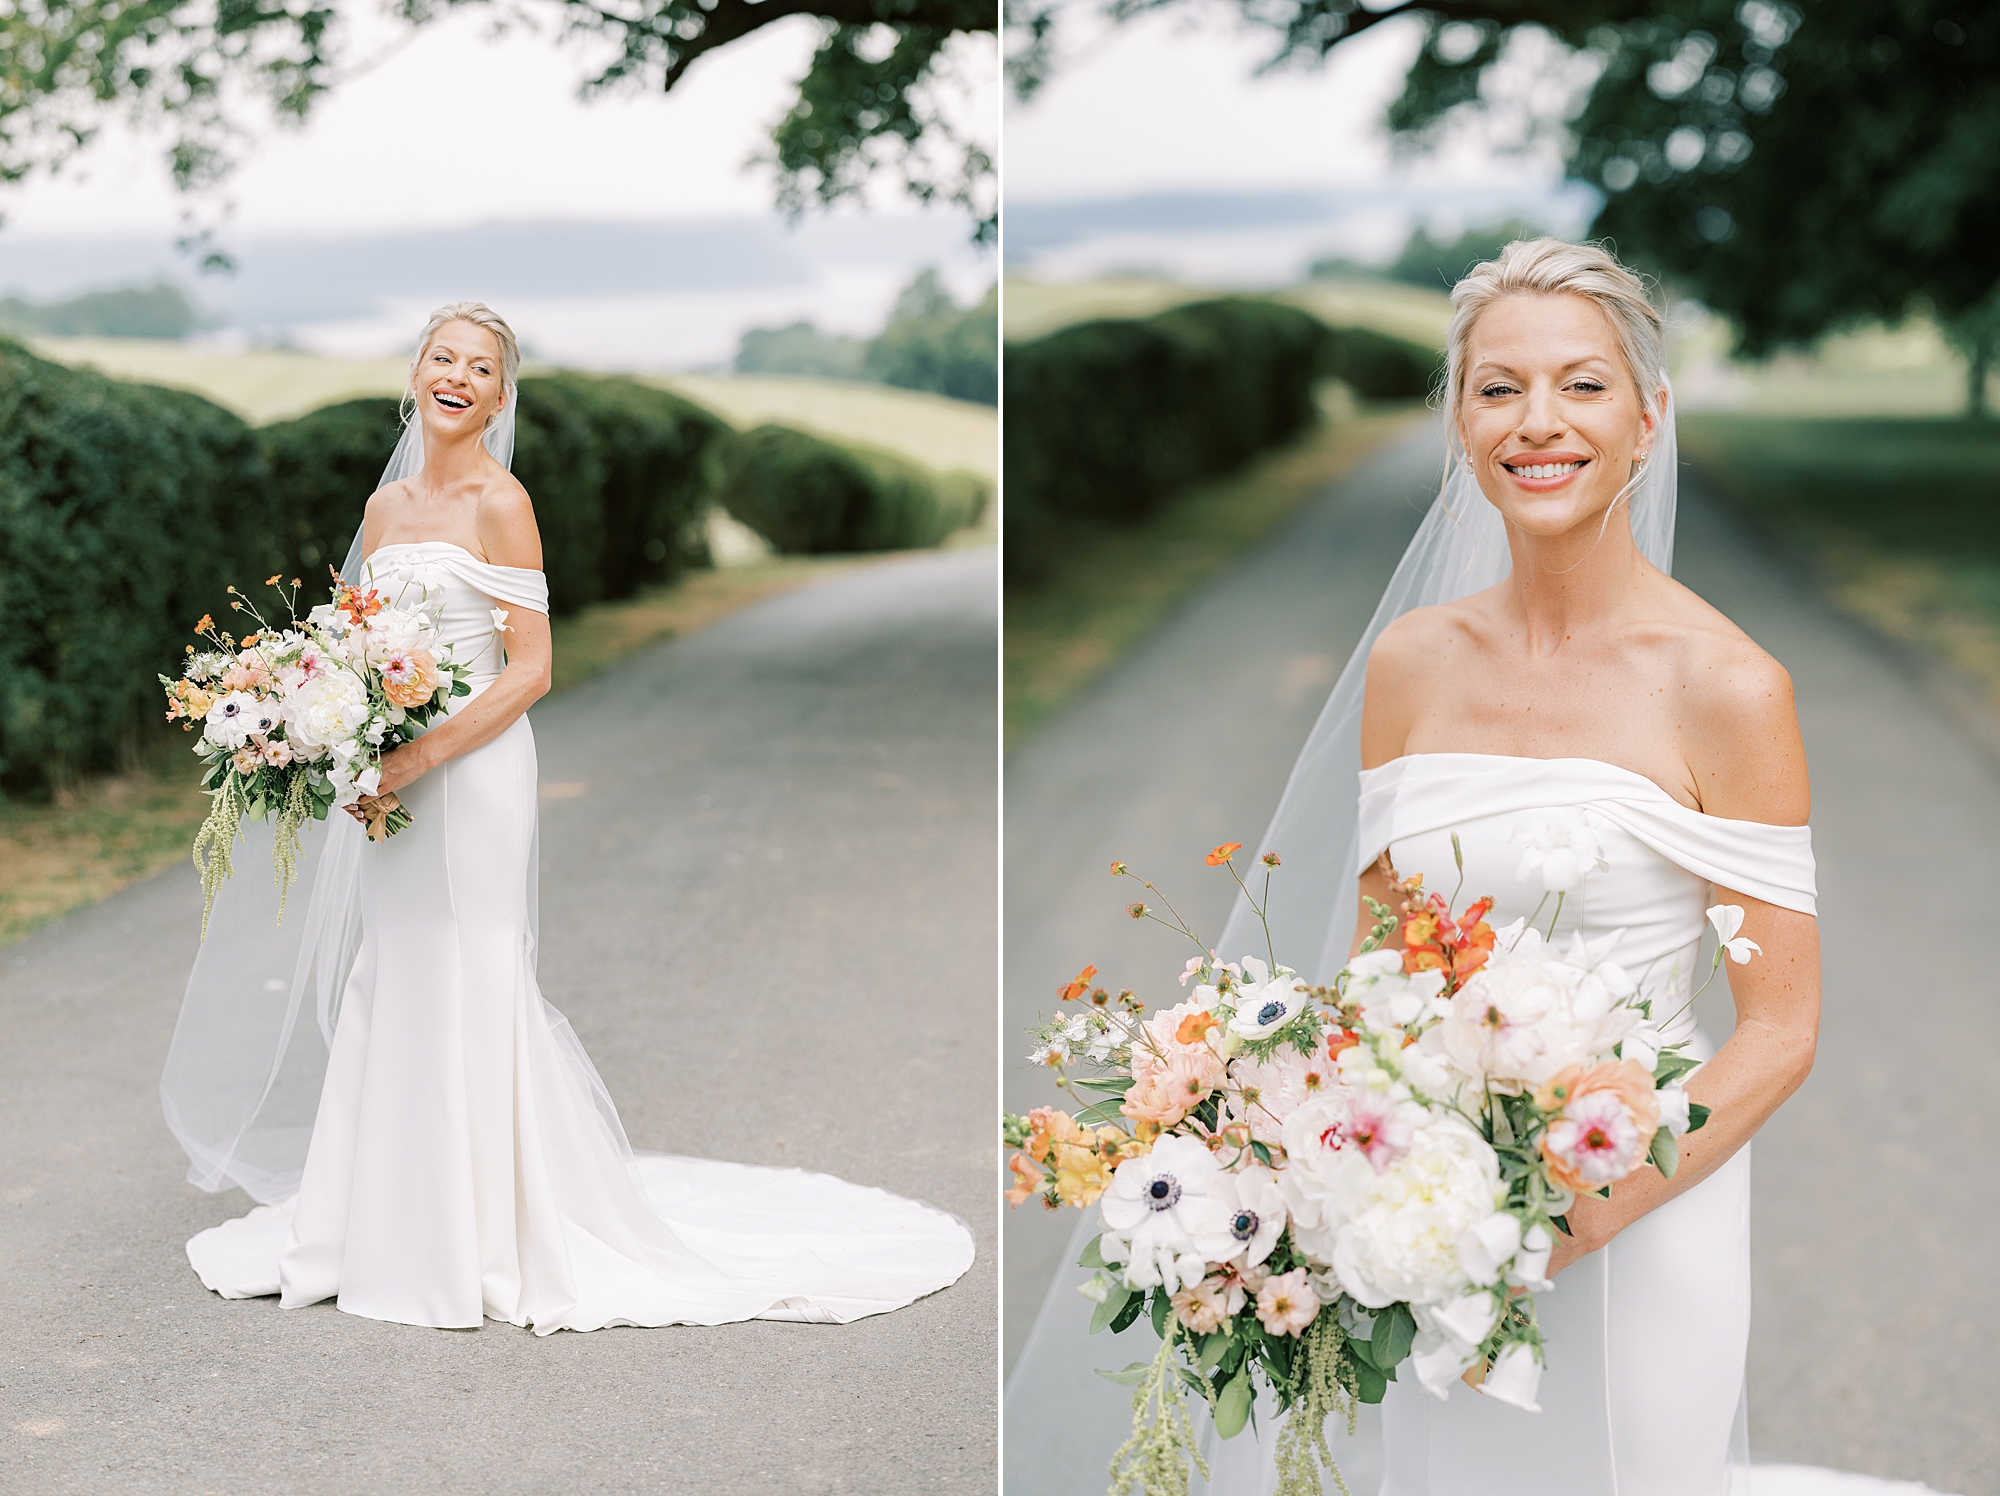 bride laughs and smiles holding bouquet of pink, orange, and white flowers with veil floating behind her